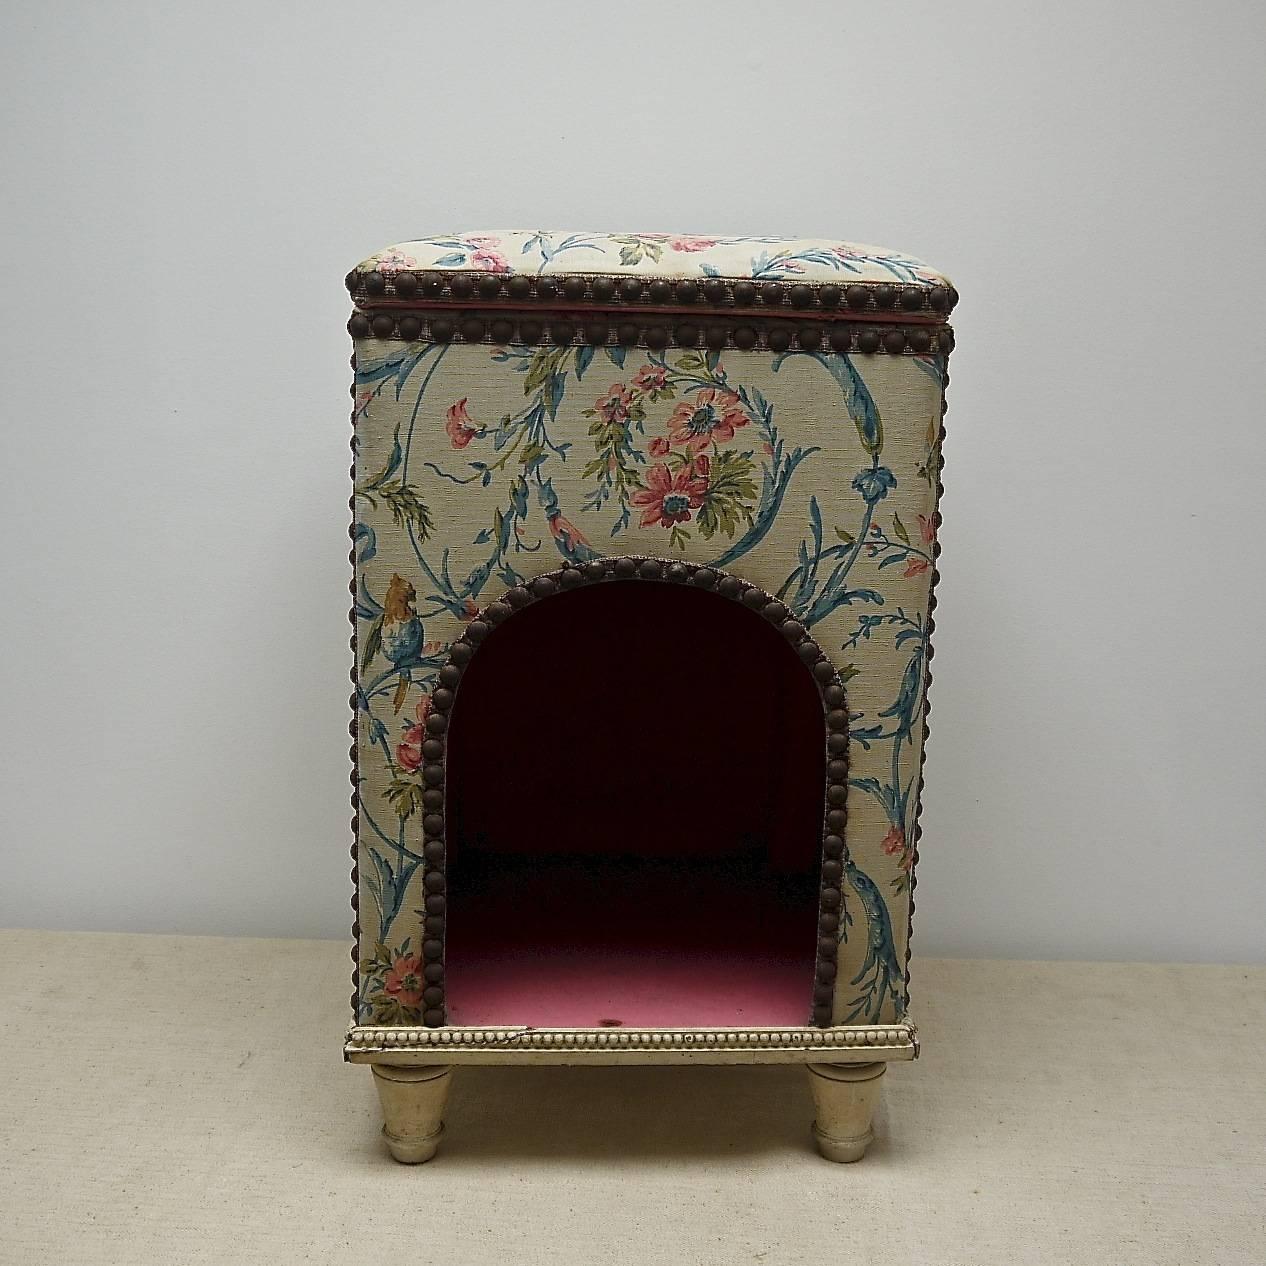 Charming and unusual French late 19th-early 20th century antique dogs bed upholstered in a pretty cotton textile with a pink cotton lining. Edged with iron studs on a ribbon trim.The top lifts up to reveal a small storage space. Beautiful and rare